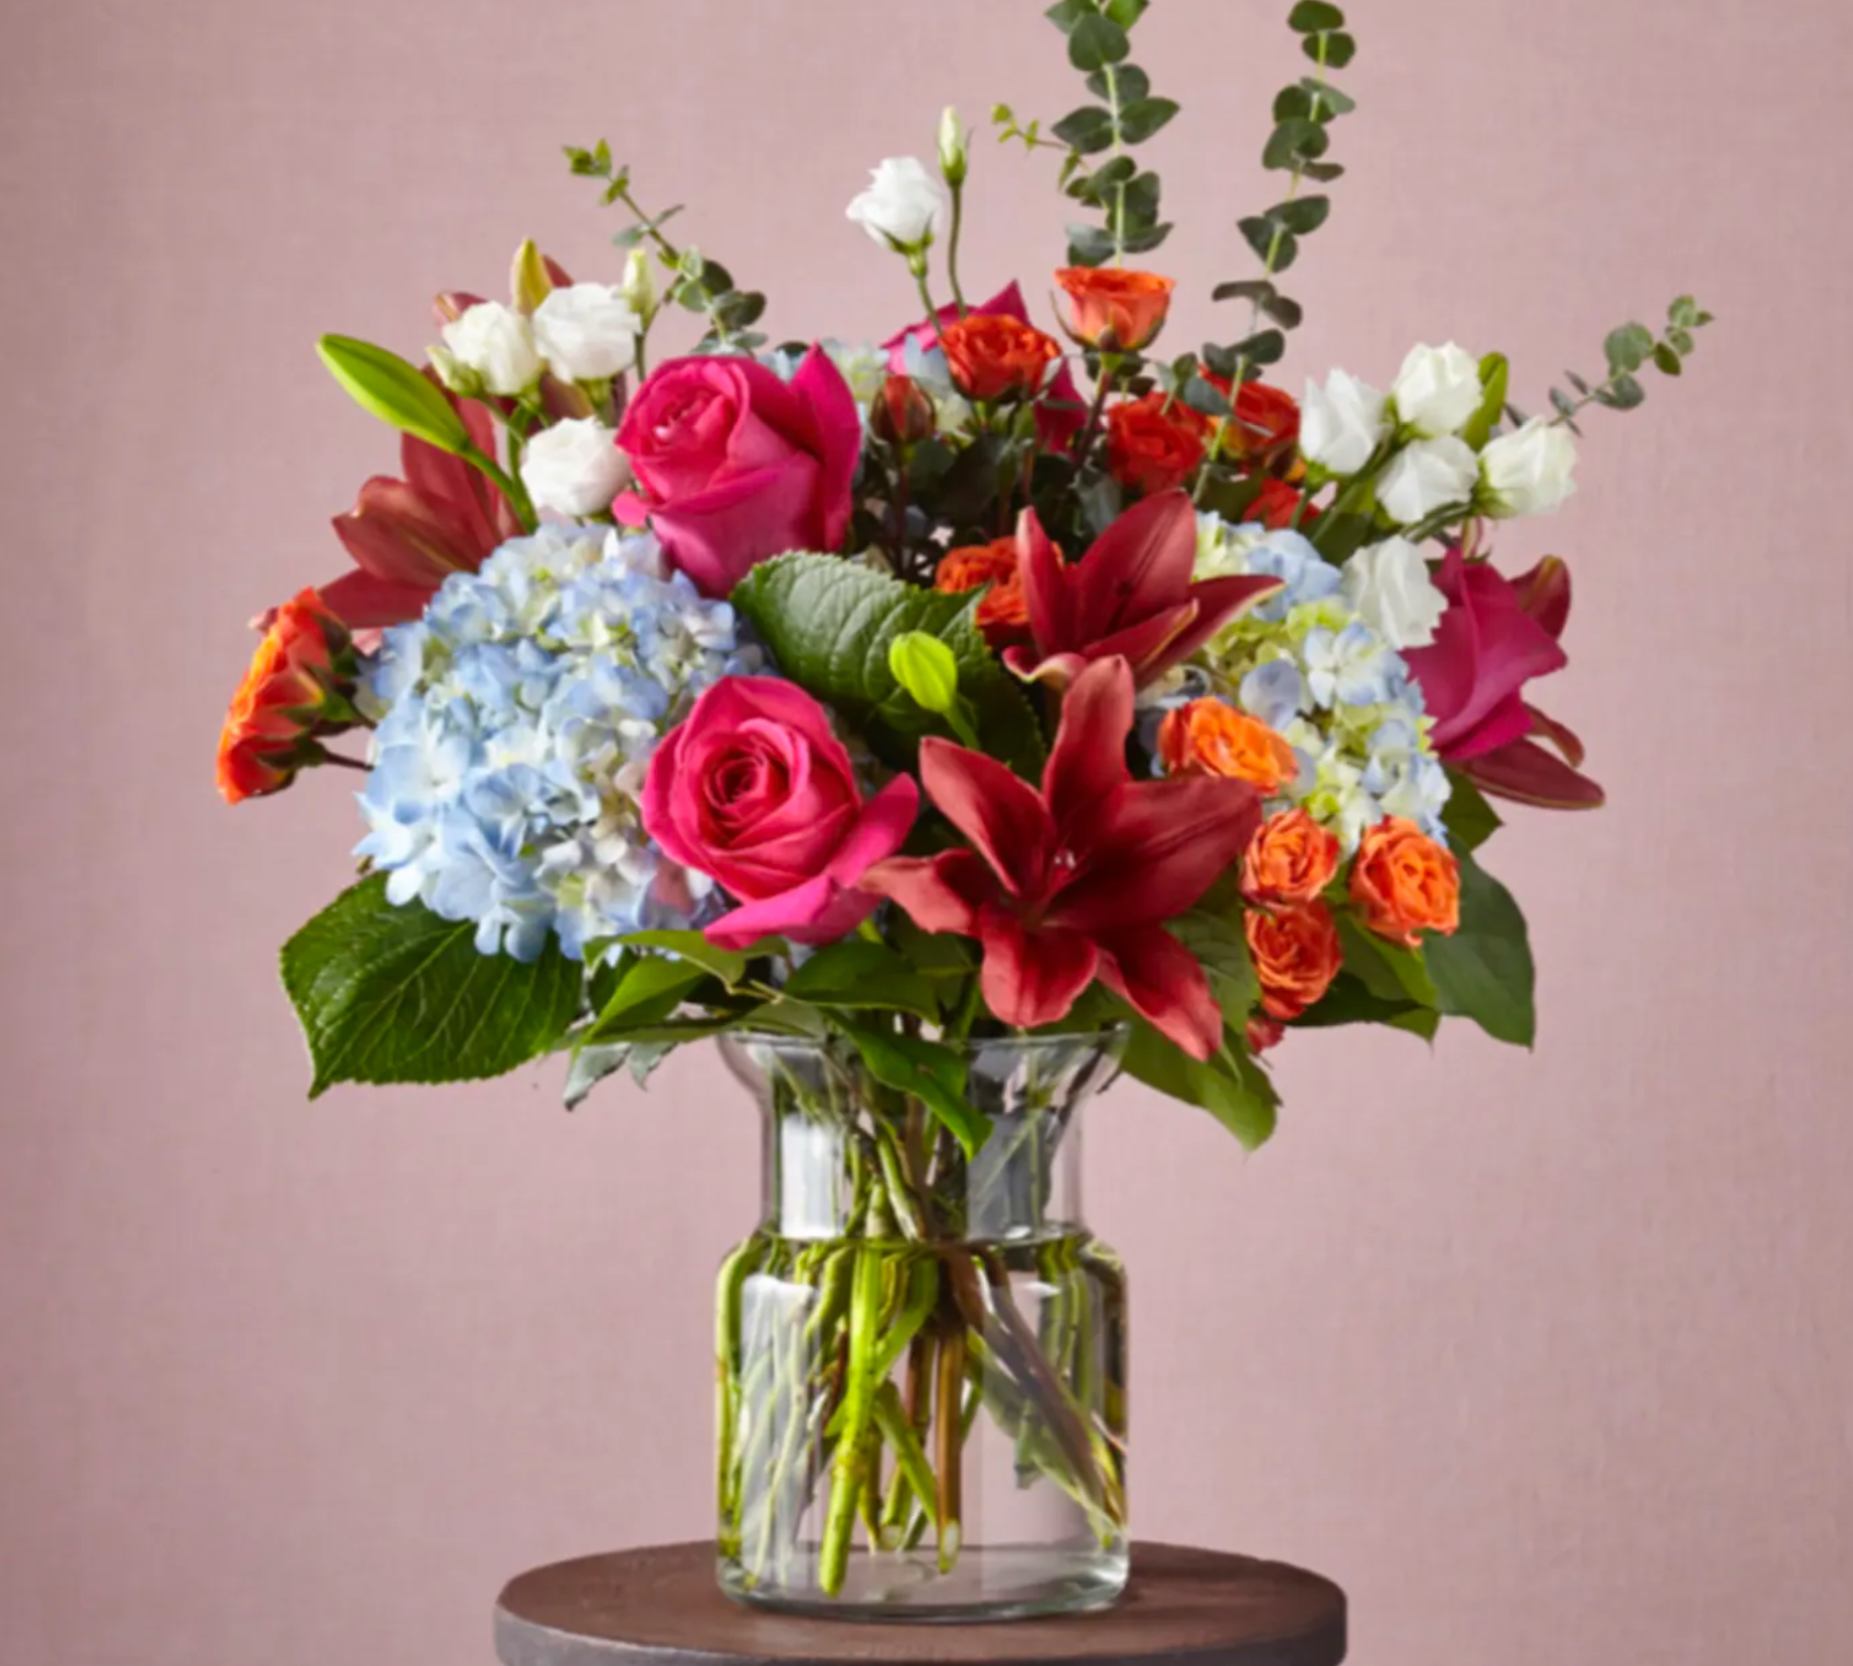 Casablanca Bouquet - Beautiful mixed arrangement. Perfect for any occasion.